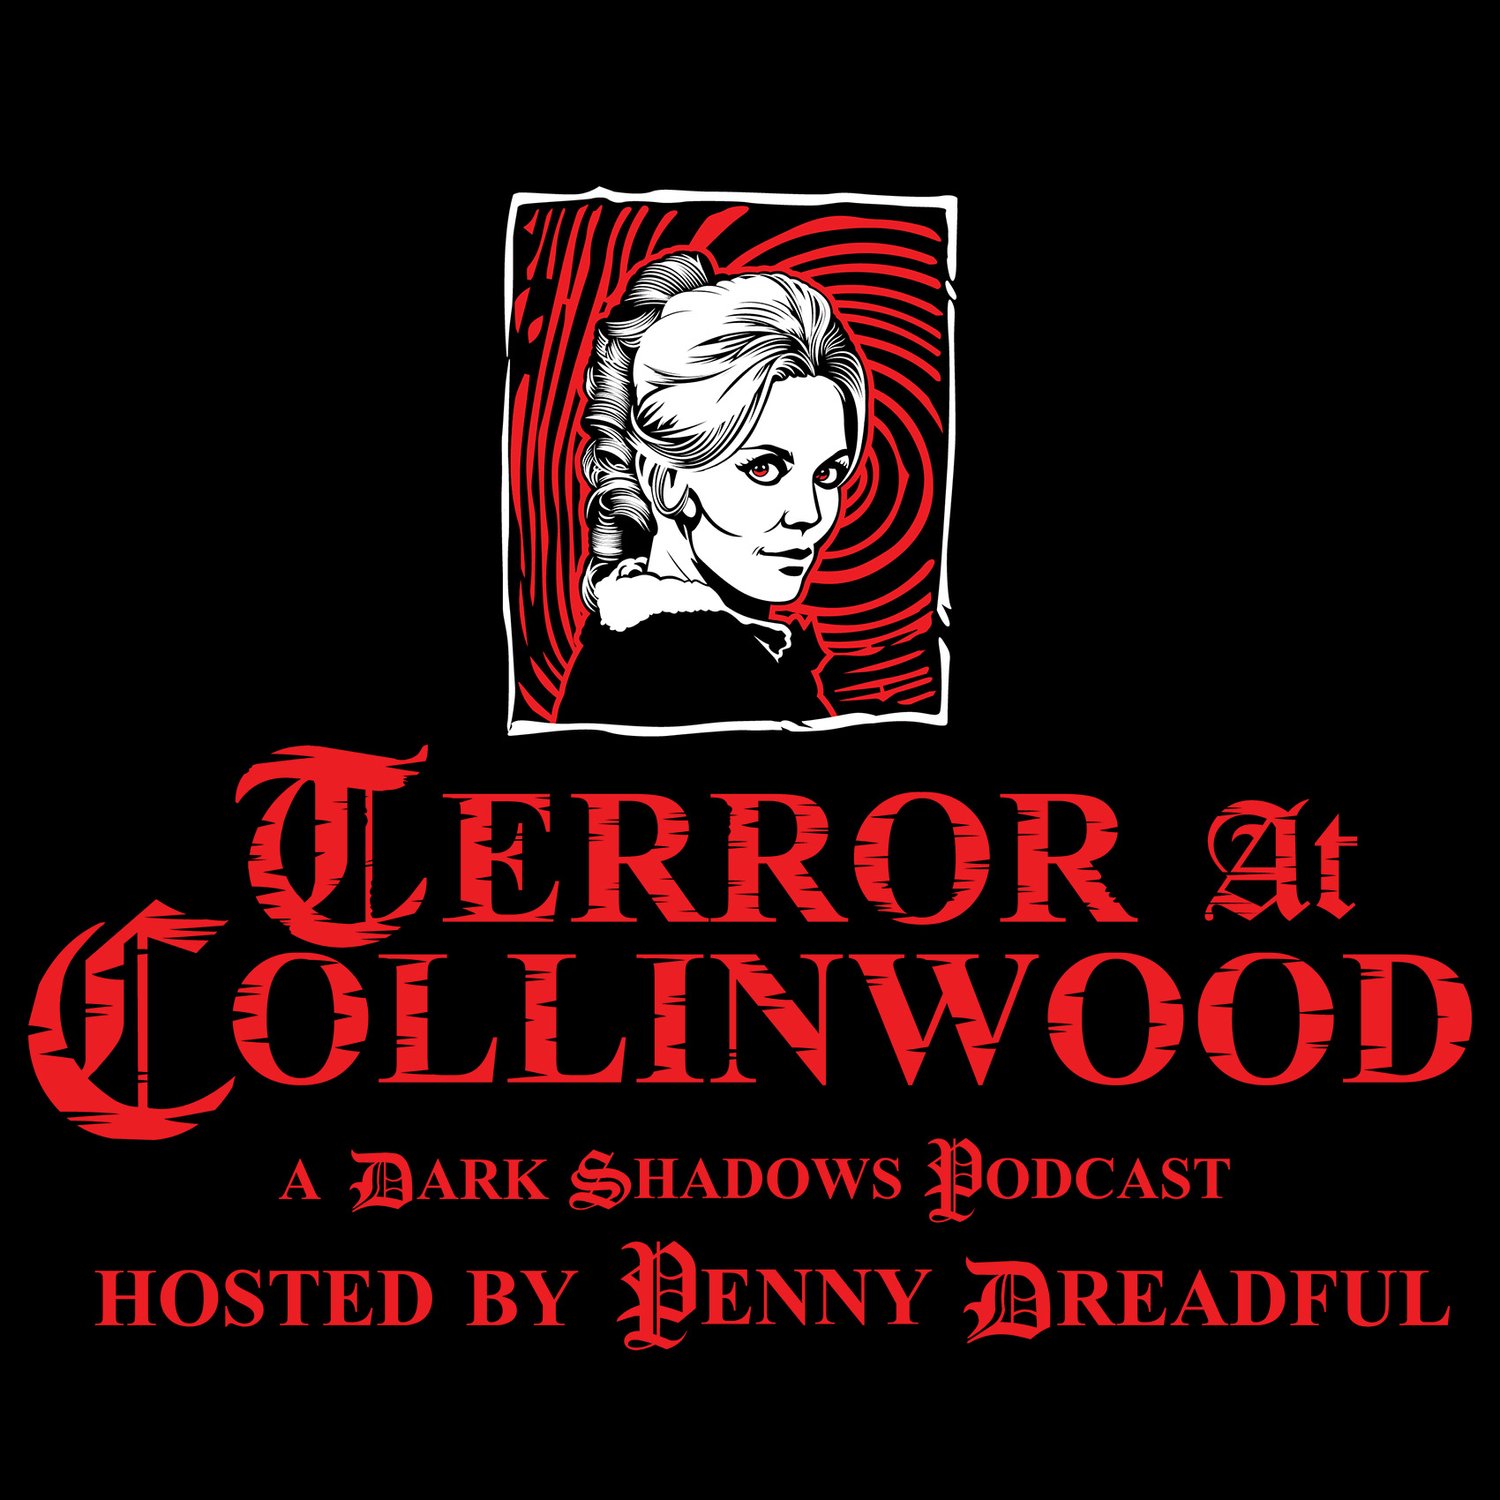 Terror at Collinwood Episode 75: The Dreamers - The Novel that Inspired the Dream Curse with Amanda Desiree and Steve Shutt